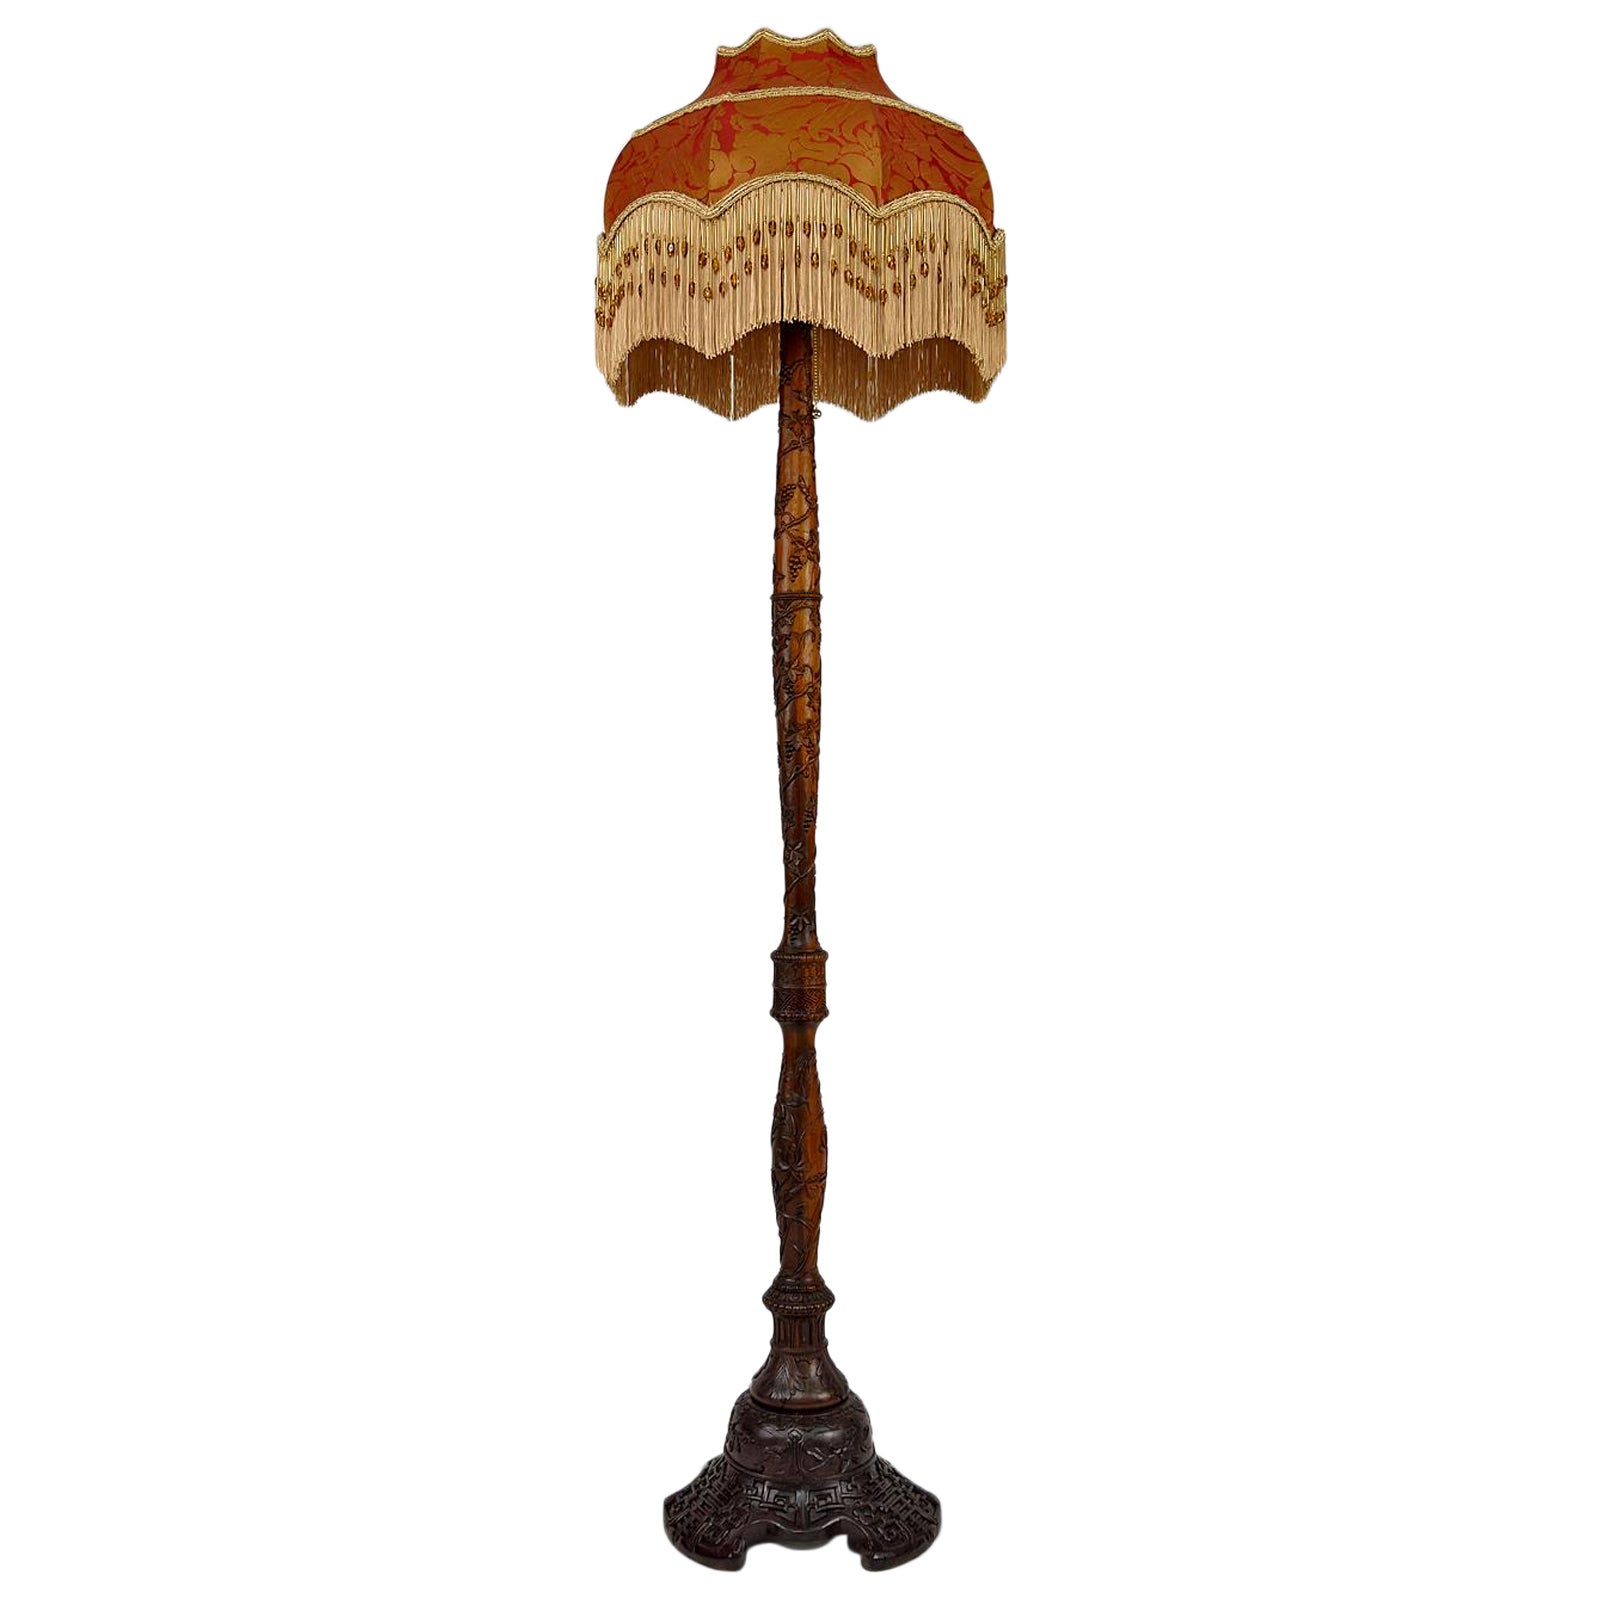 Antique Asian carved wooden floor lamp, Indochina or China, circa 1900